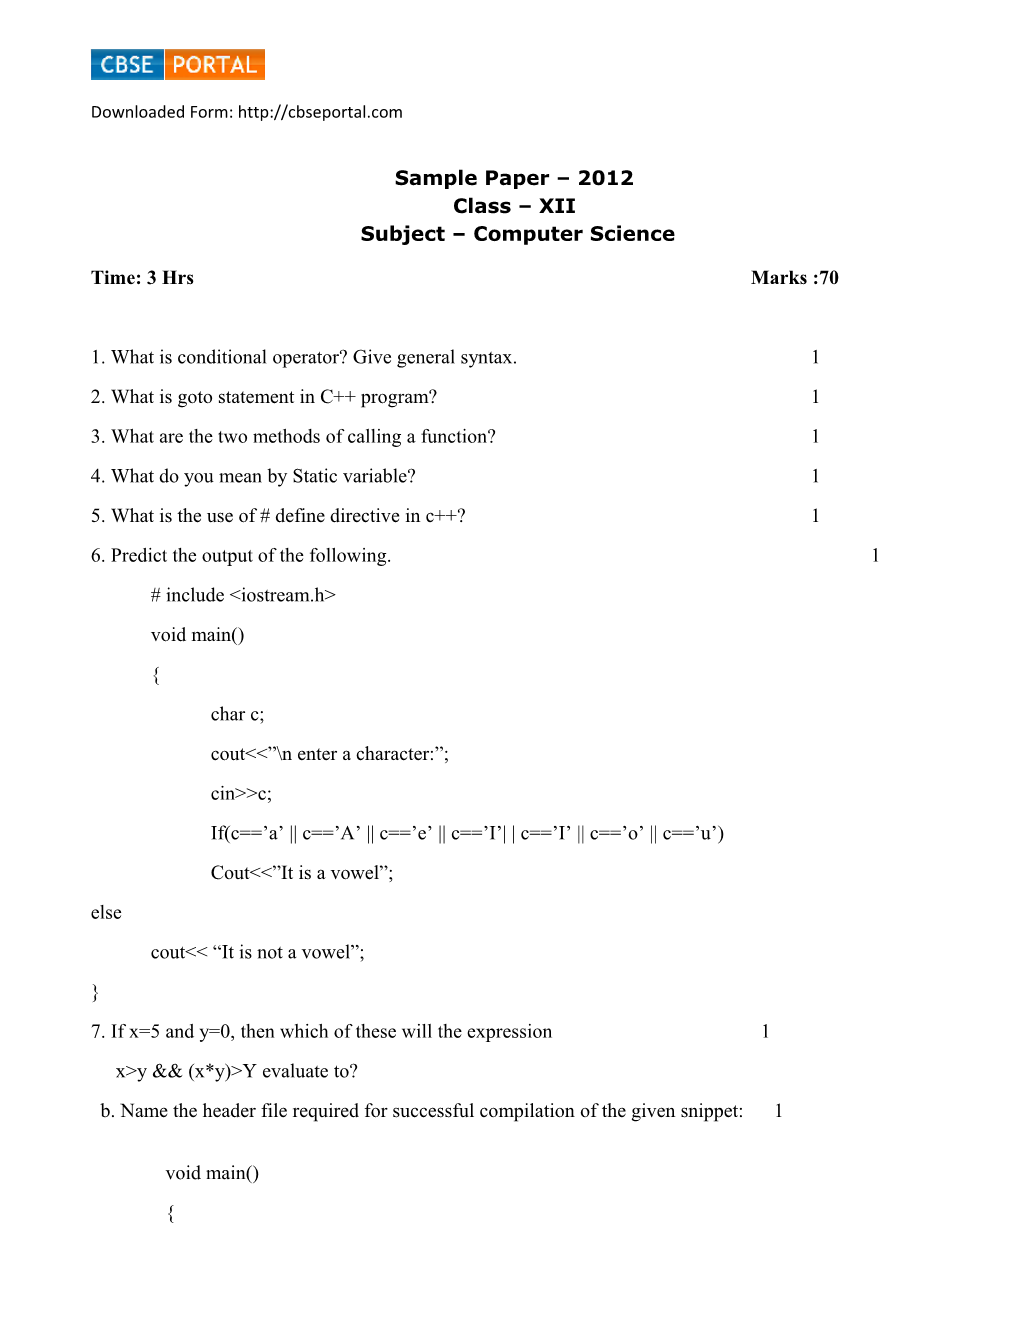 Sample Paper 2012 Class XII Subject Computer Science